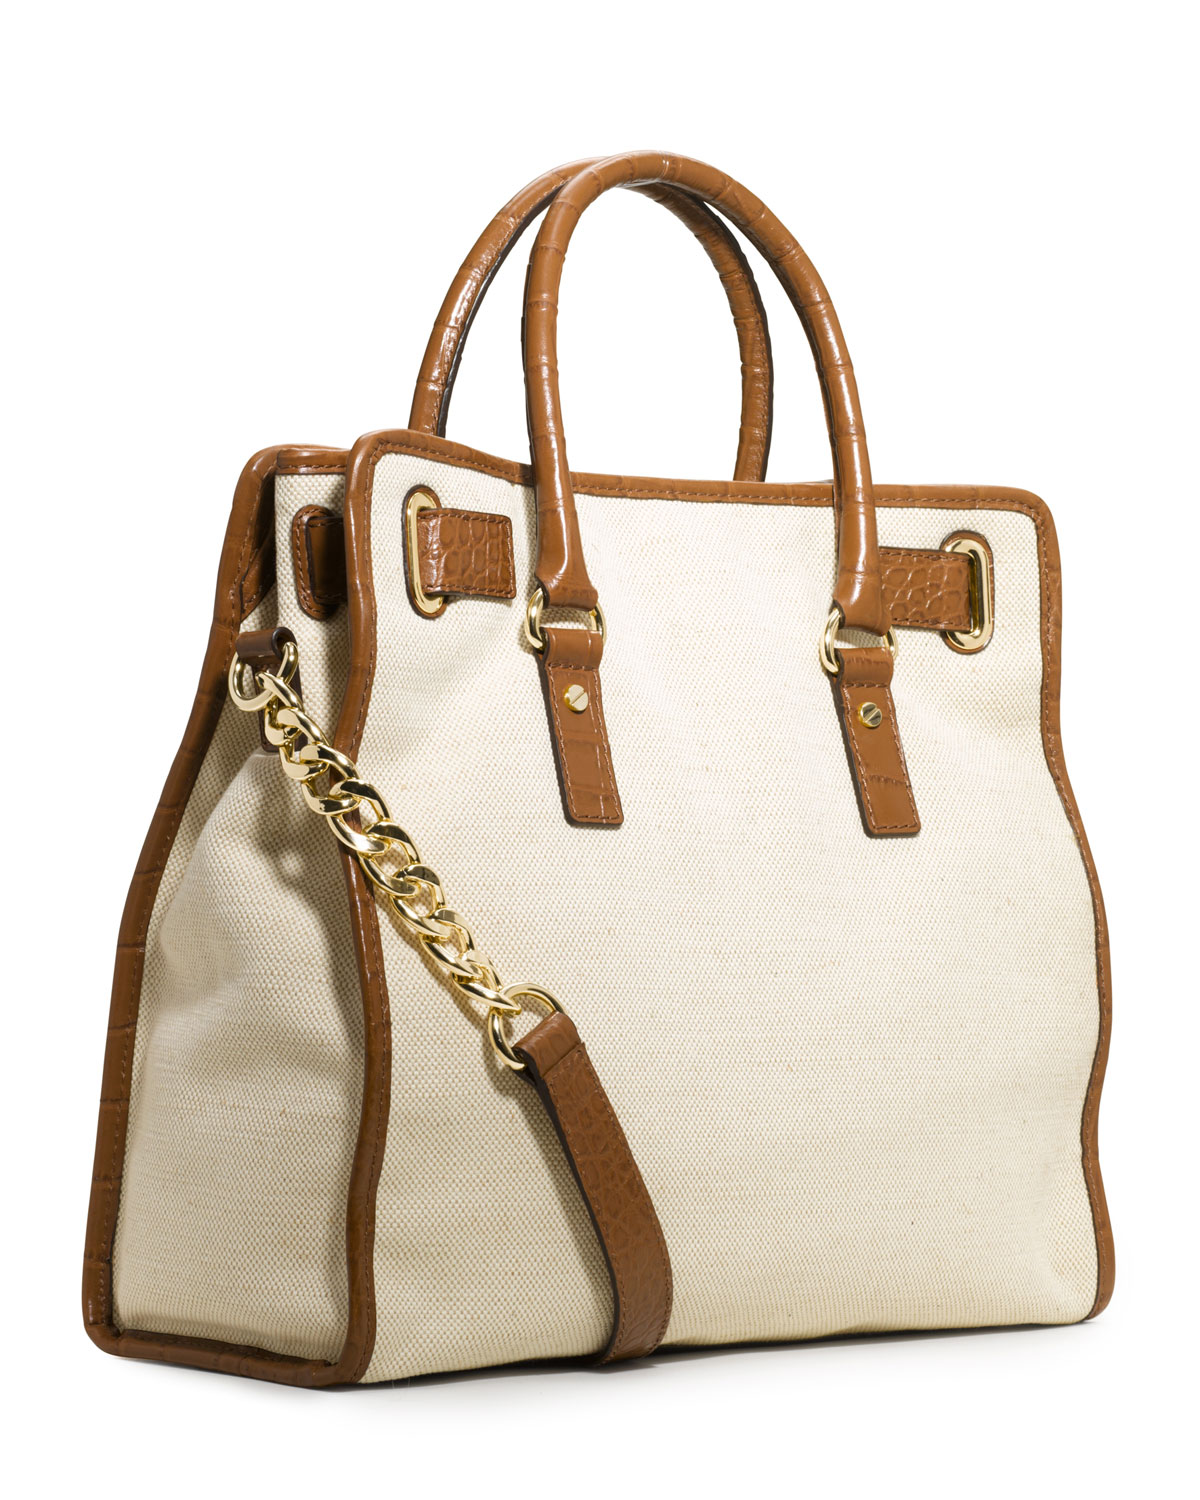 Lyst - Michael kors Large Hamilton Canvas Tote in Natural